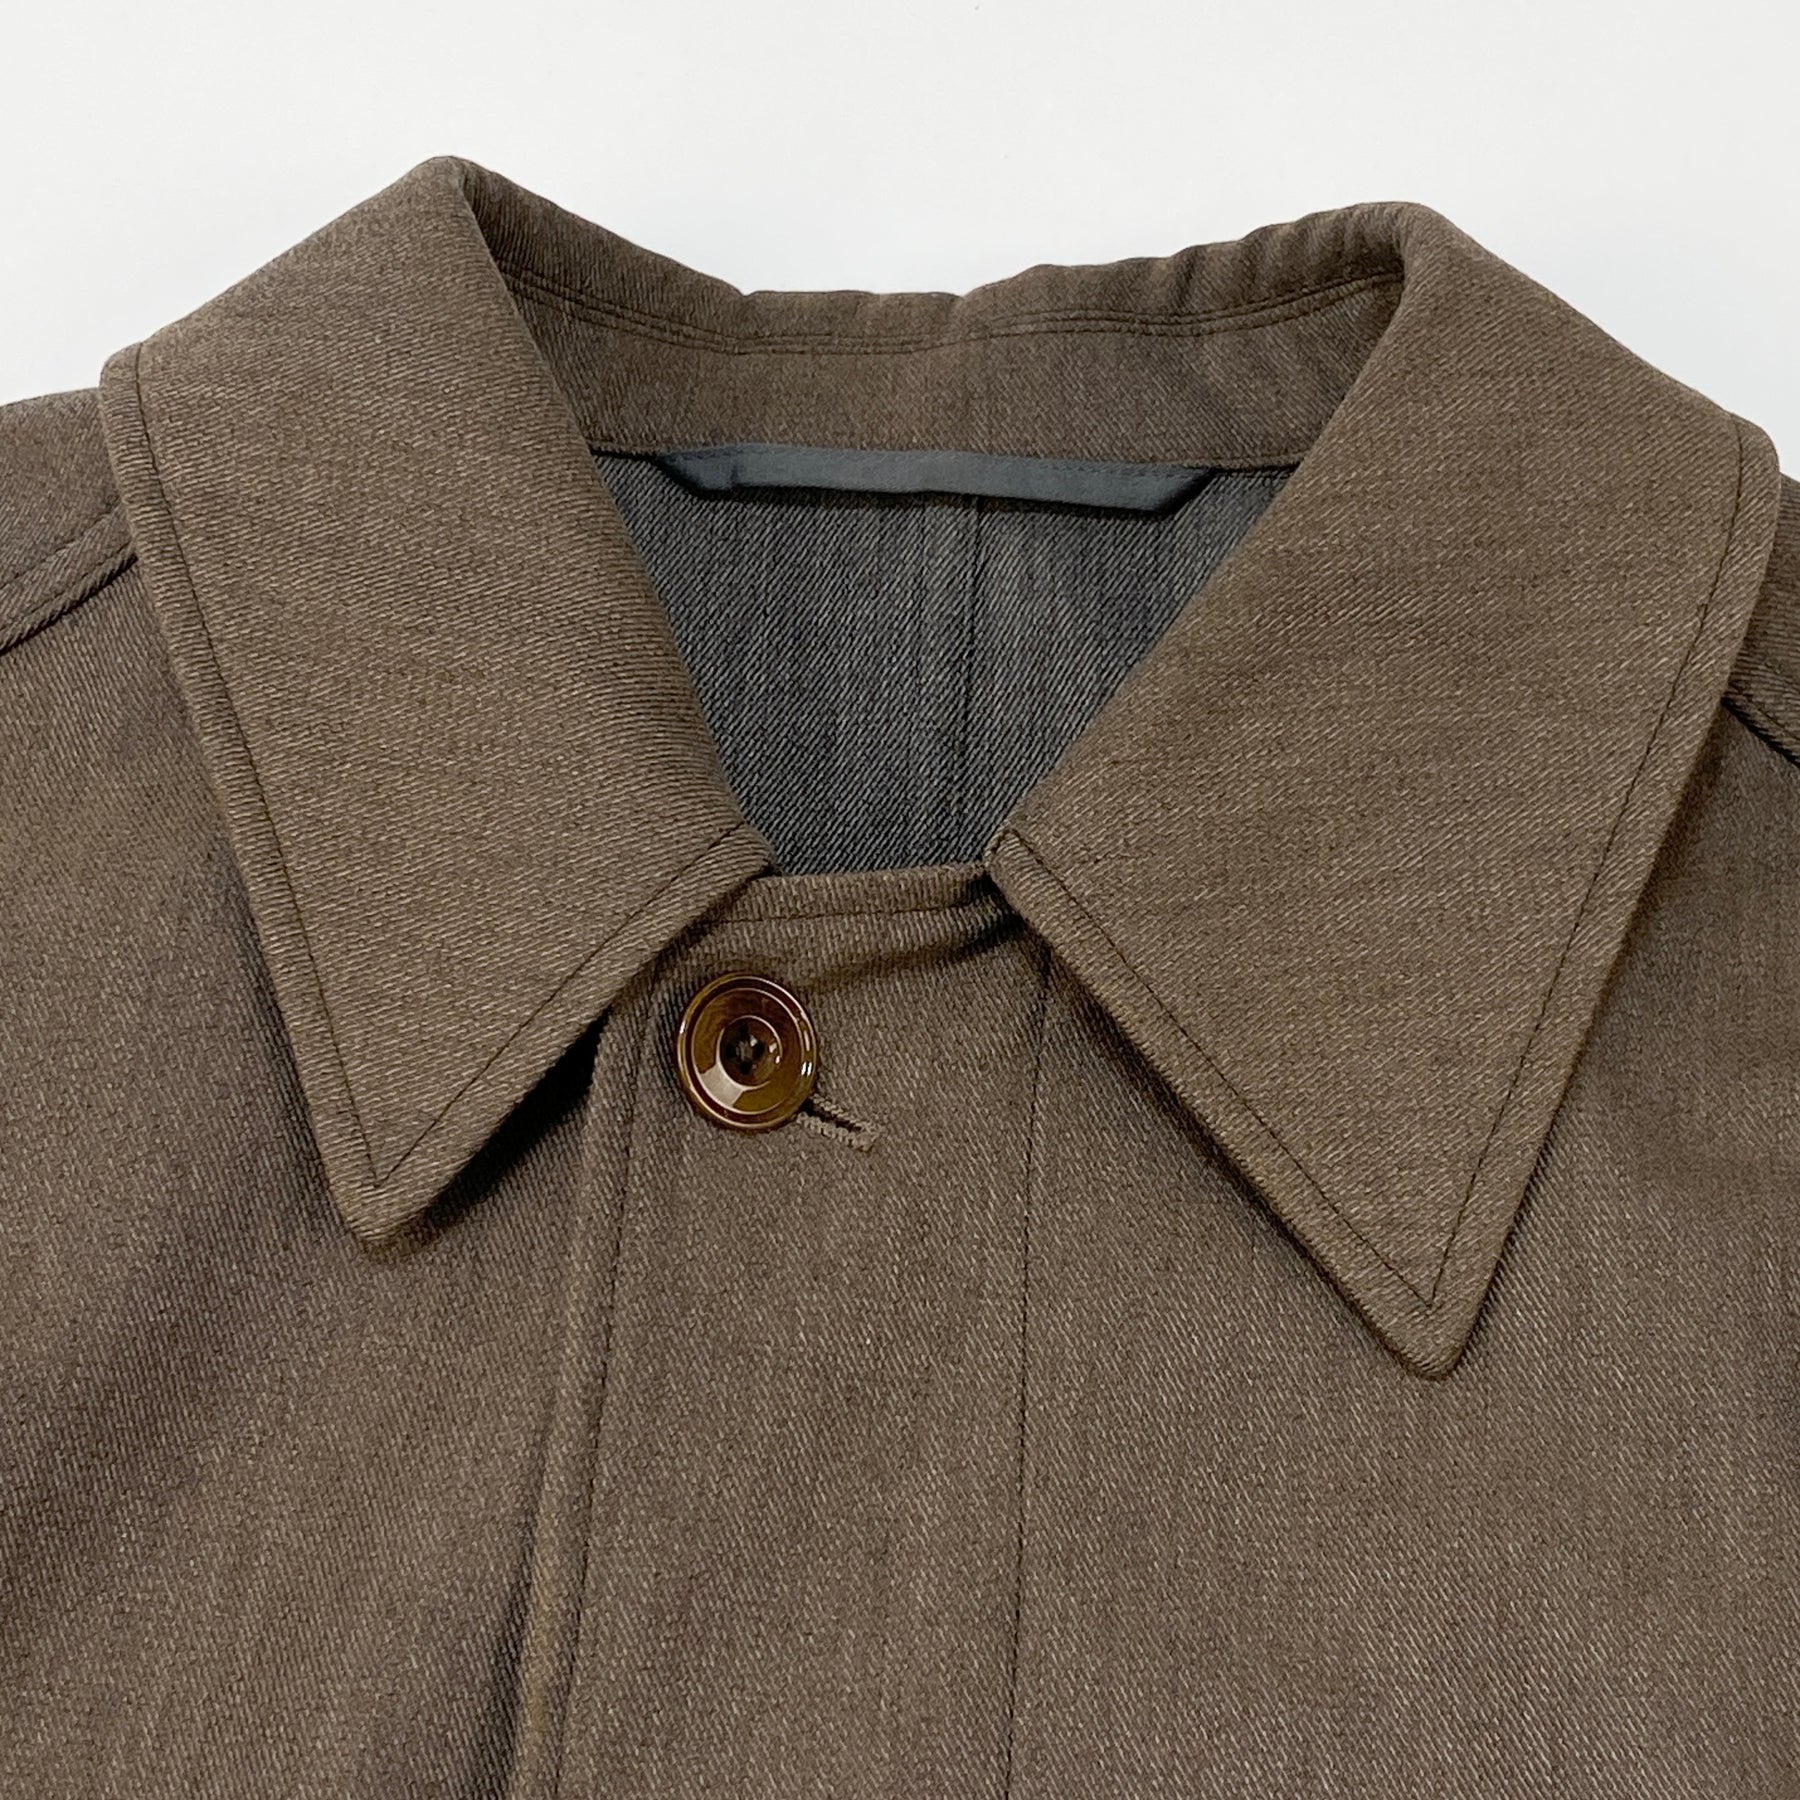 LEMAIRE / ルメール 2020AW MILITARY OVERCOAT M203 CO150 LF484 48